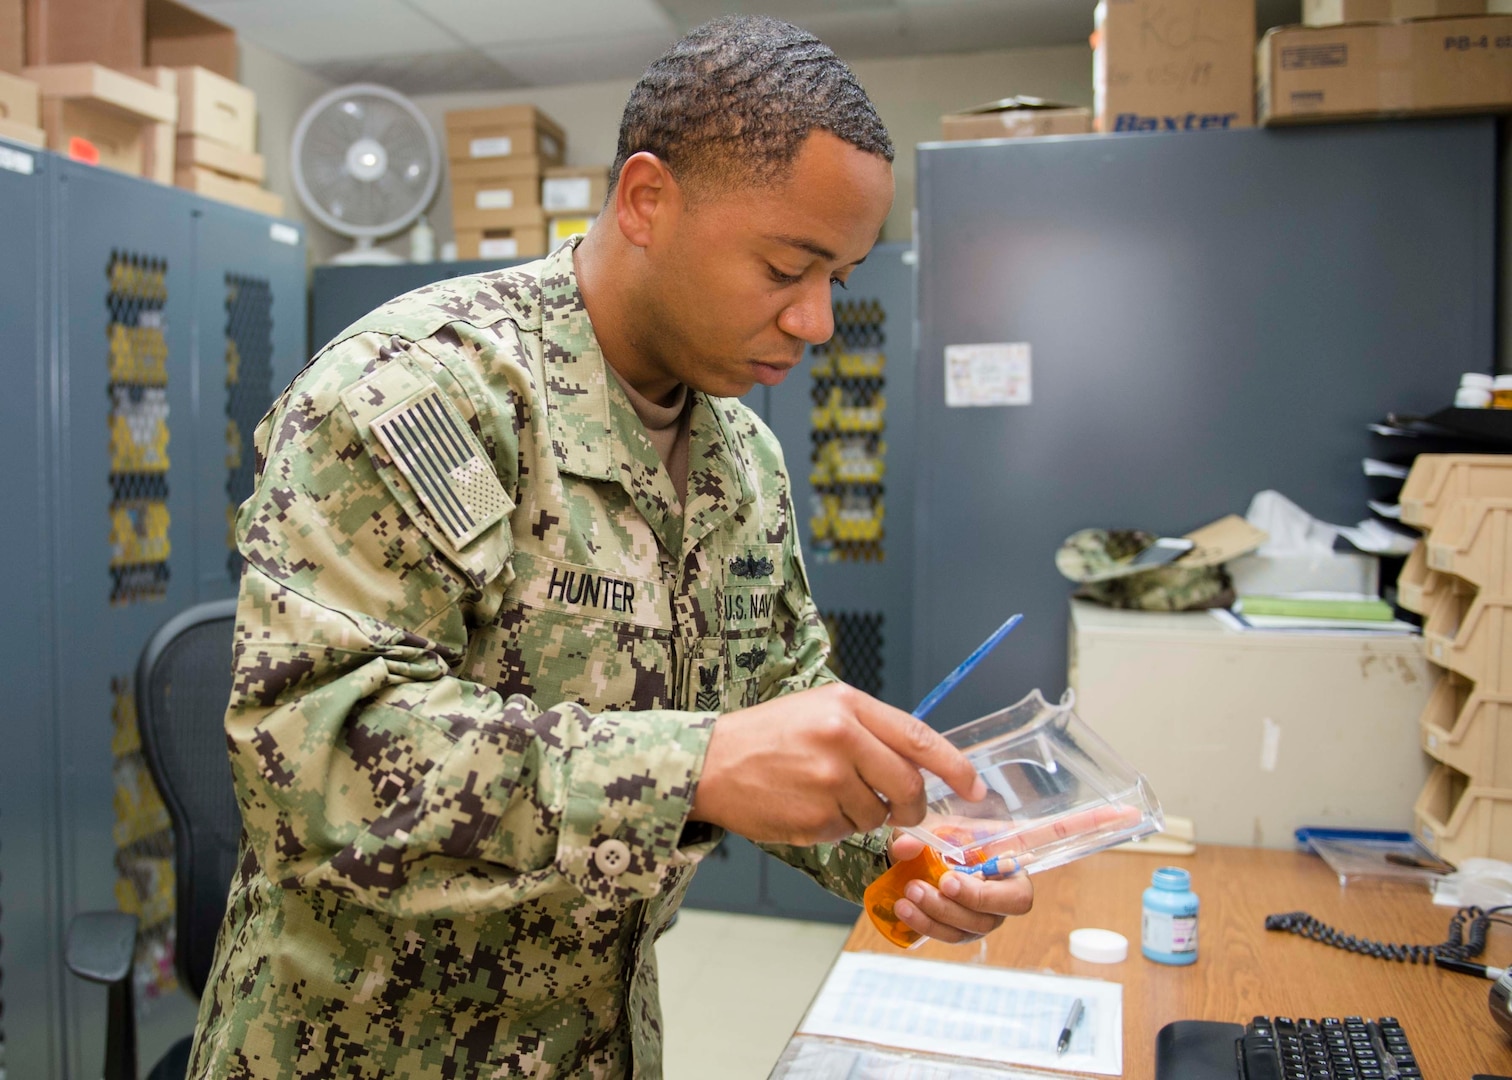 Hospital Corpsman 1st Class Travis Hunter fills a prescription at the Expeditionary Medical Facility on Camp Lemonnier, Djibouti, Oct. 3, 2018.